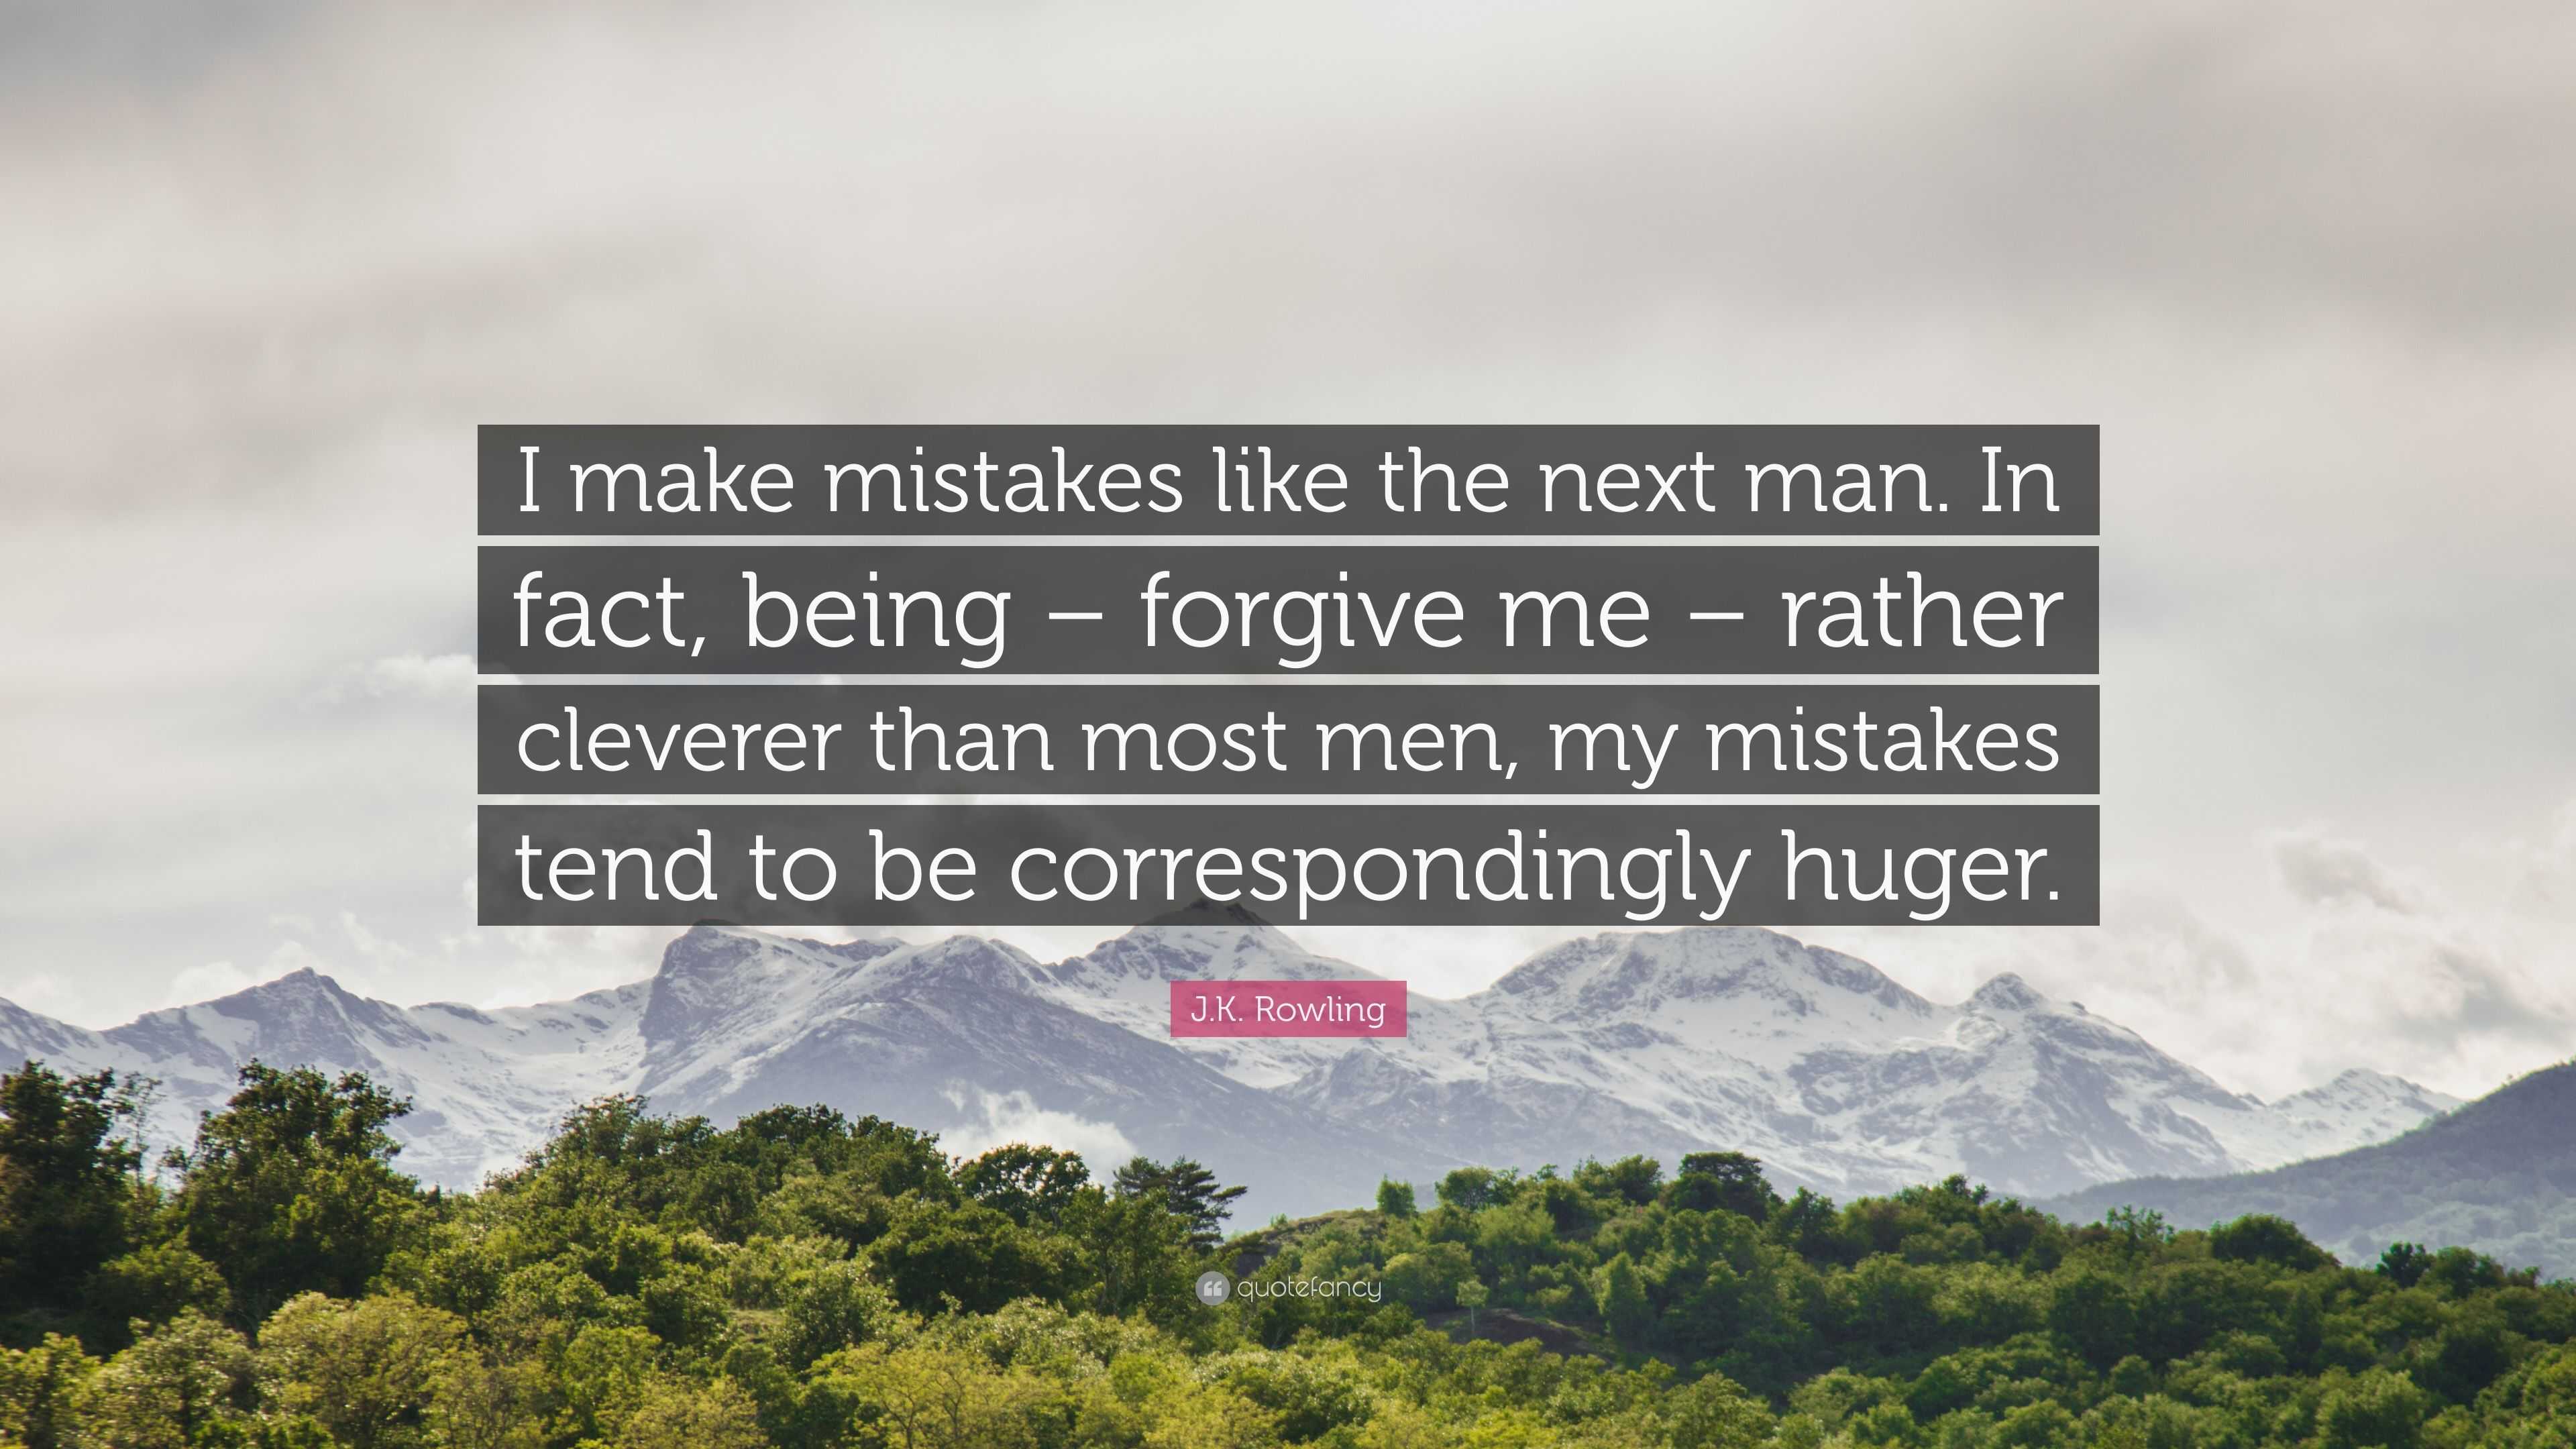 J.K. Rowling Quote: “I make mistakes like the next man. In fact, being –  forgive me – rather cleverer than most men, my mistakes tend to be c”